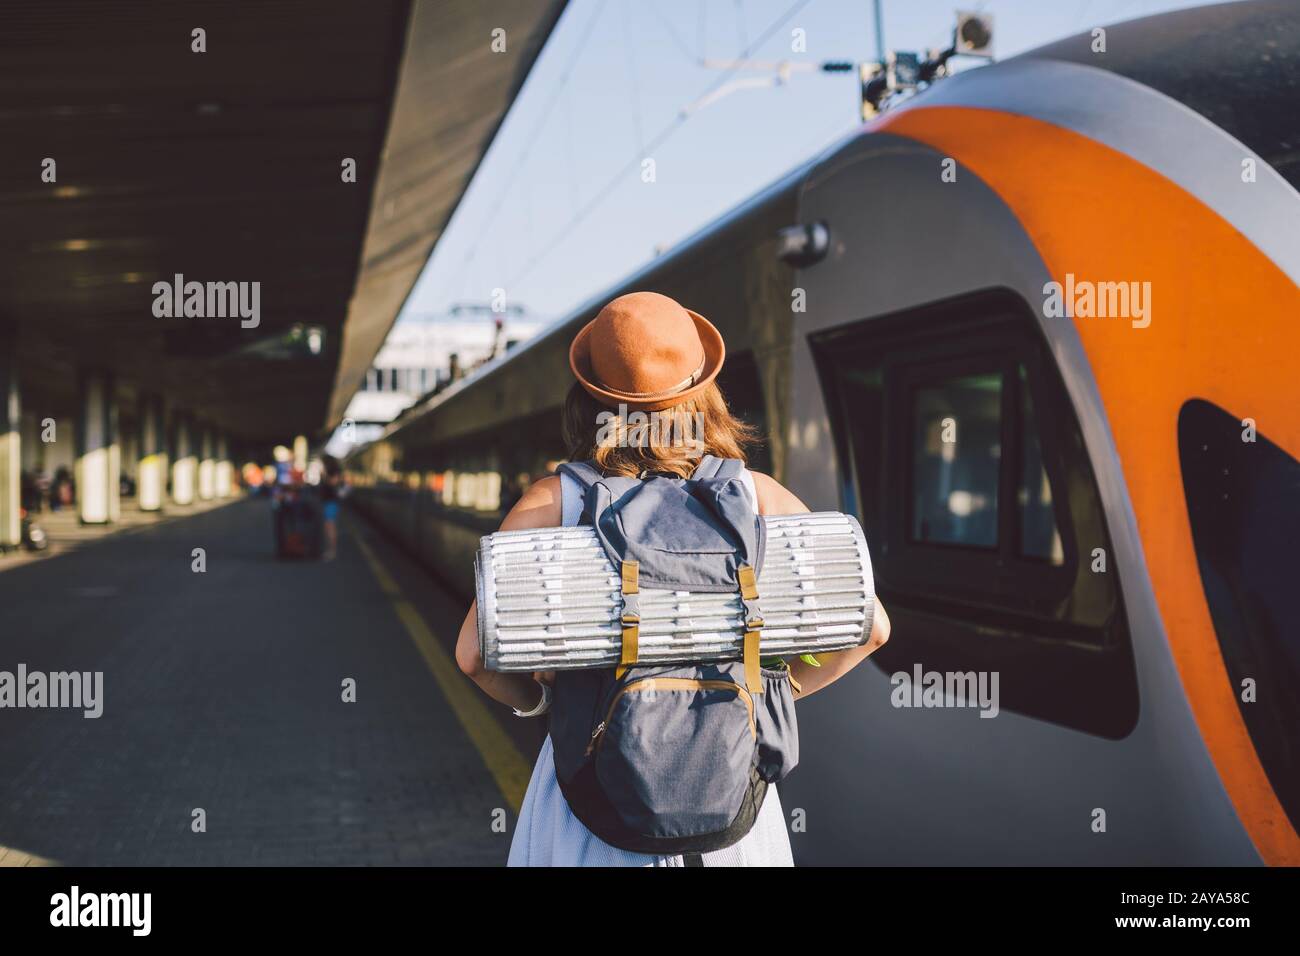 Theme transportation and travel. young caucasian woman standing at train station platform near train backs train background with Stock Photo